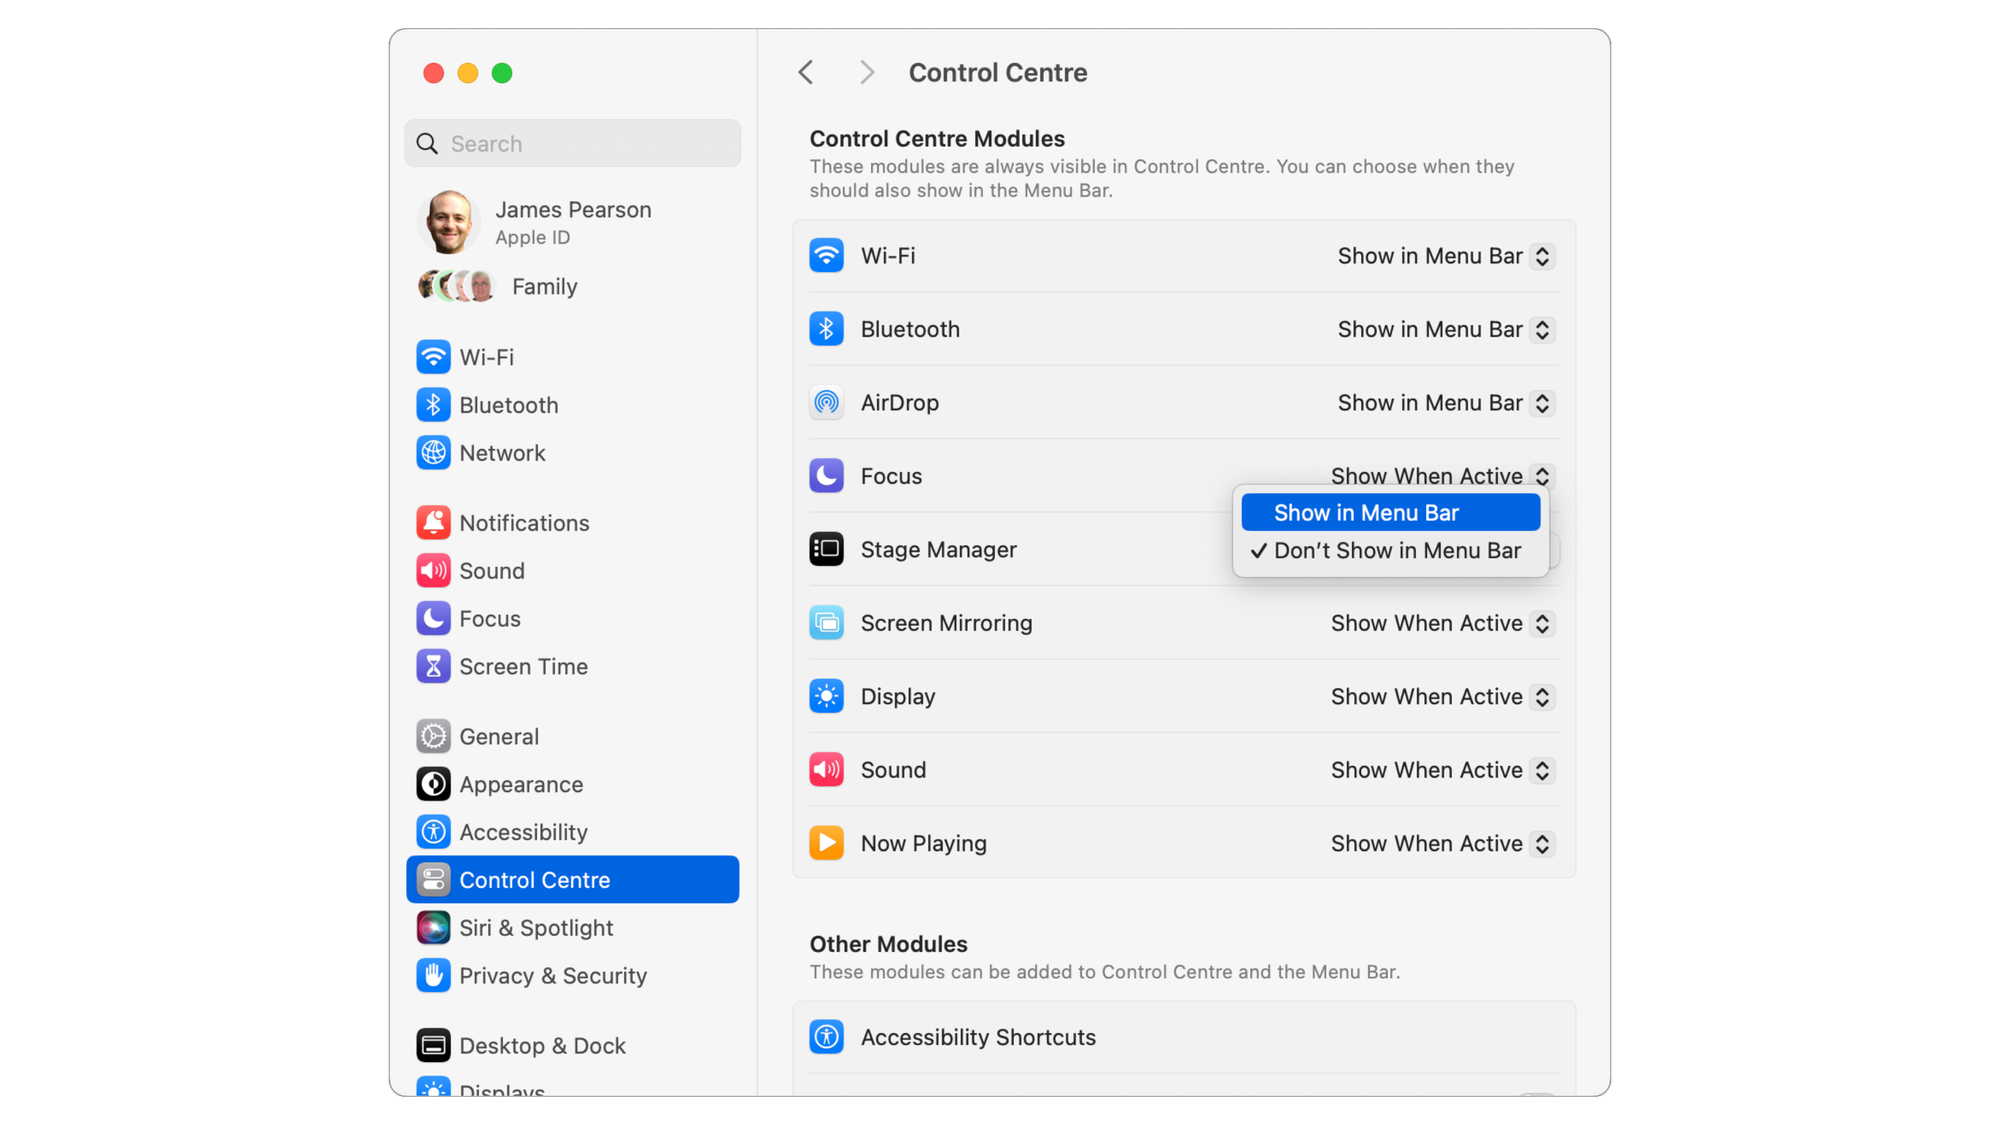 The Stage Manager option displayed in the settings menu for Control Centre with the option to Show or Don't Show in Menu Bar.